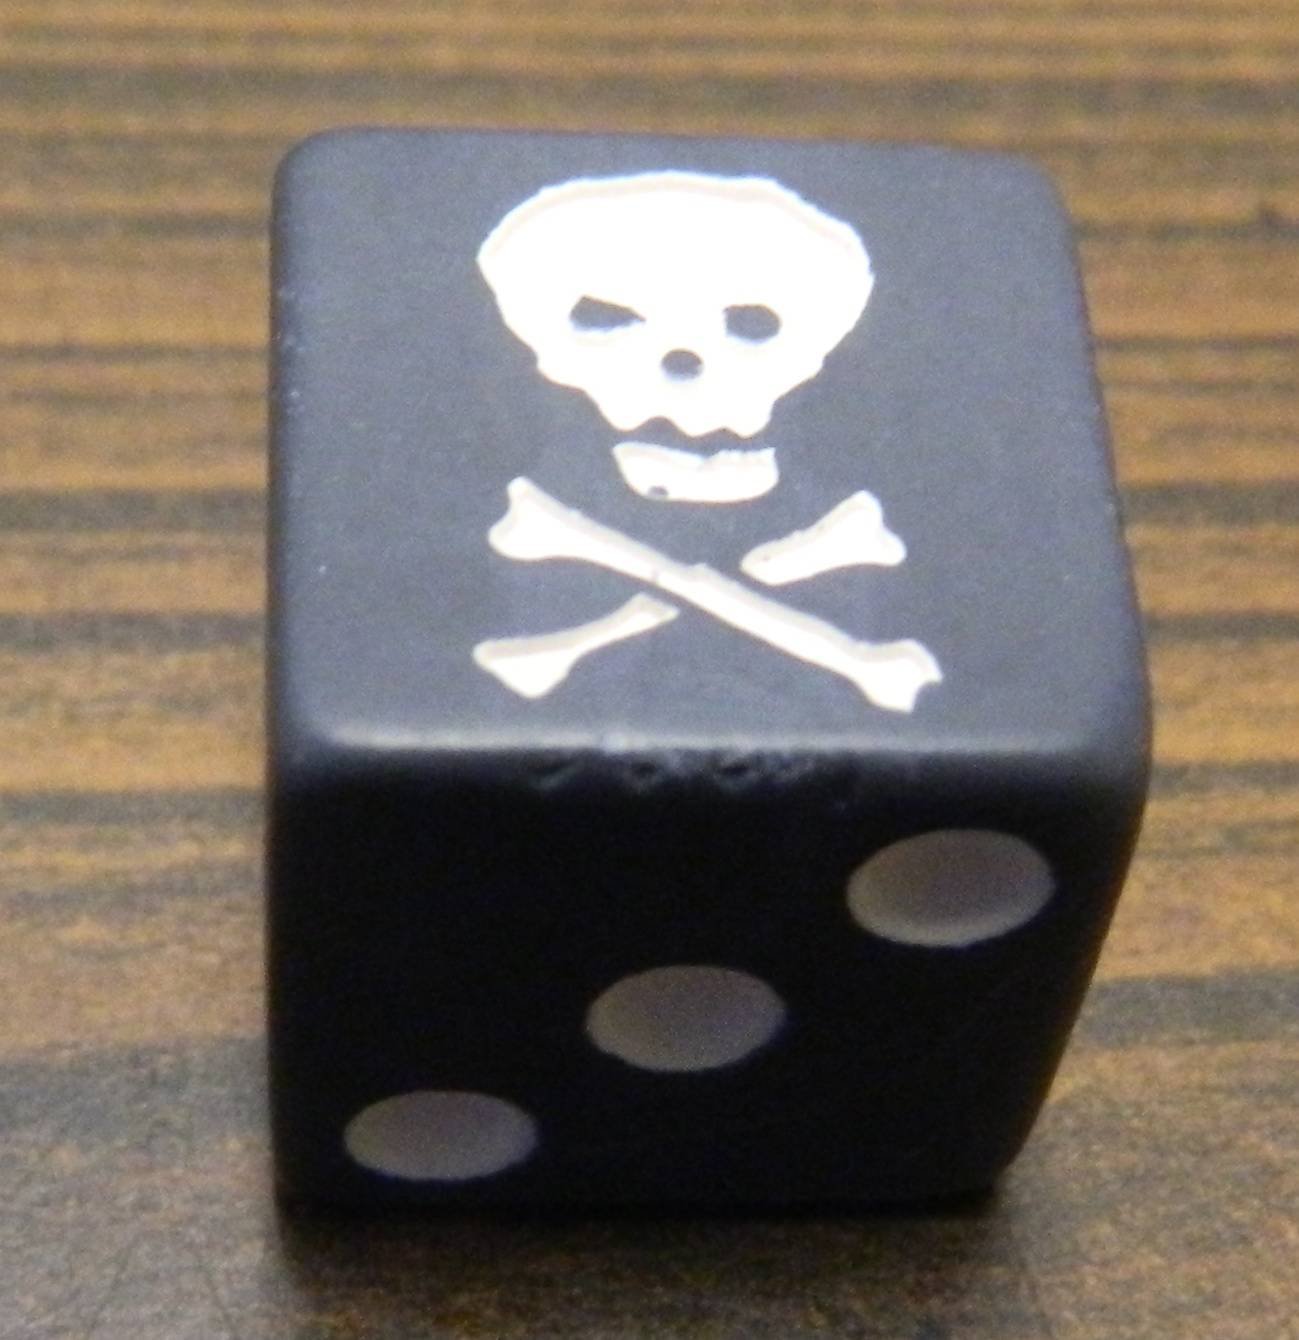 Pirates Of The Caribbean PIRATES DICE Game Replacement Parts Pieces CUP & 5 DICE 